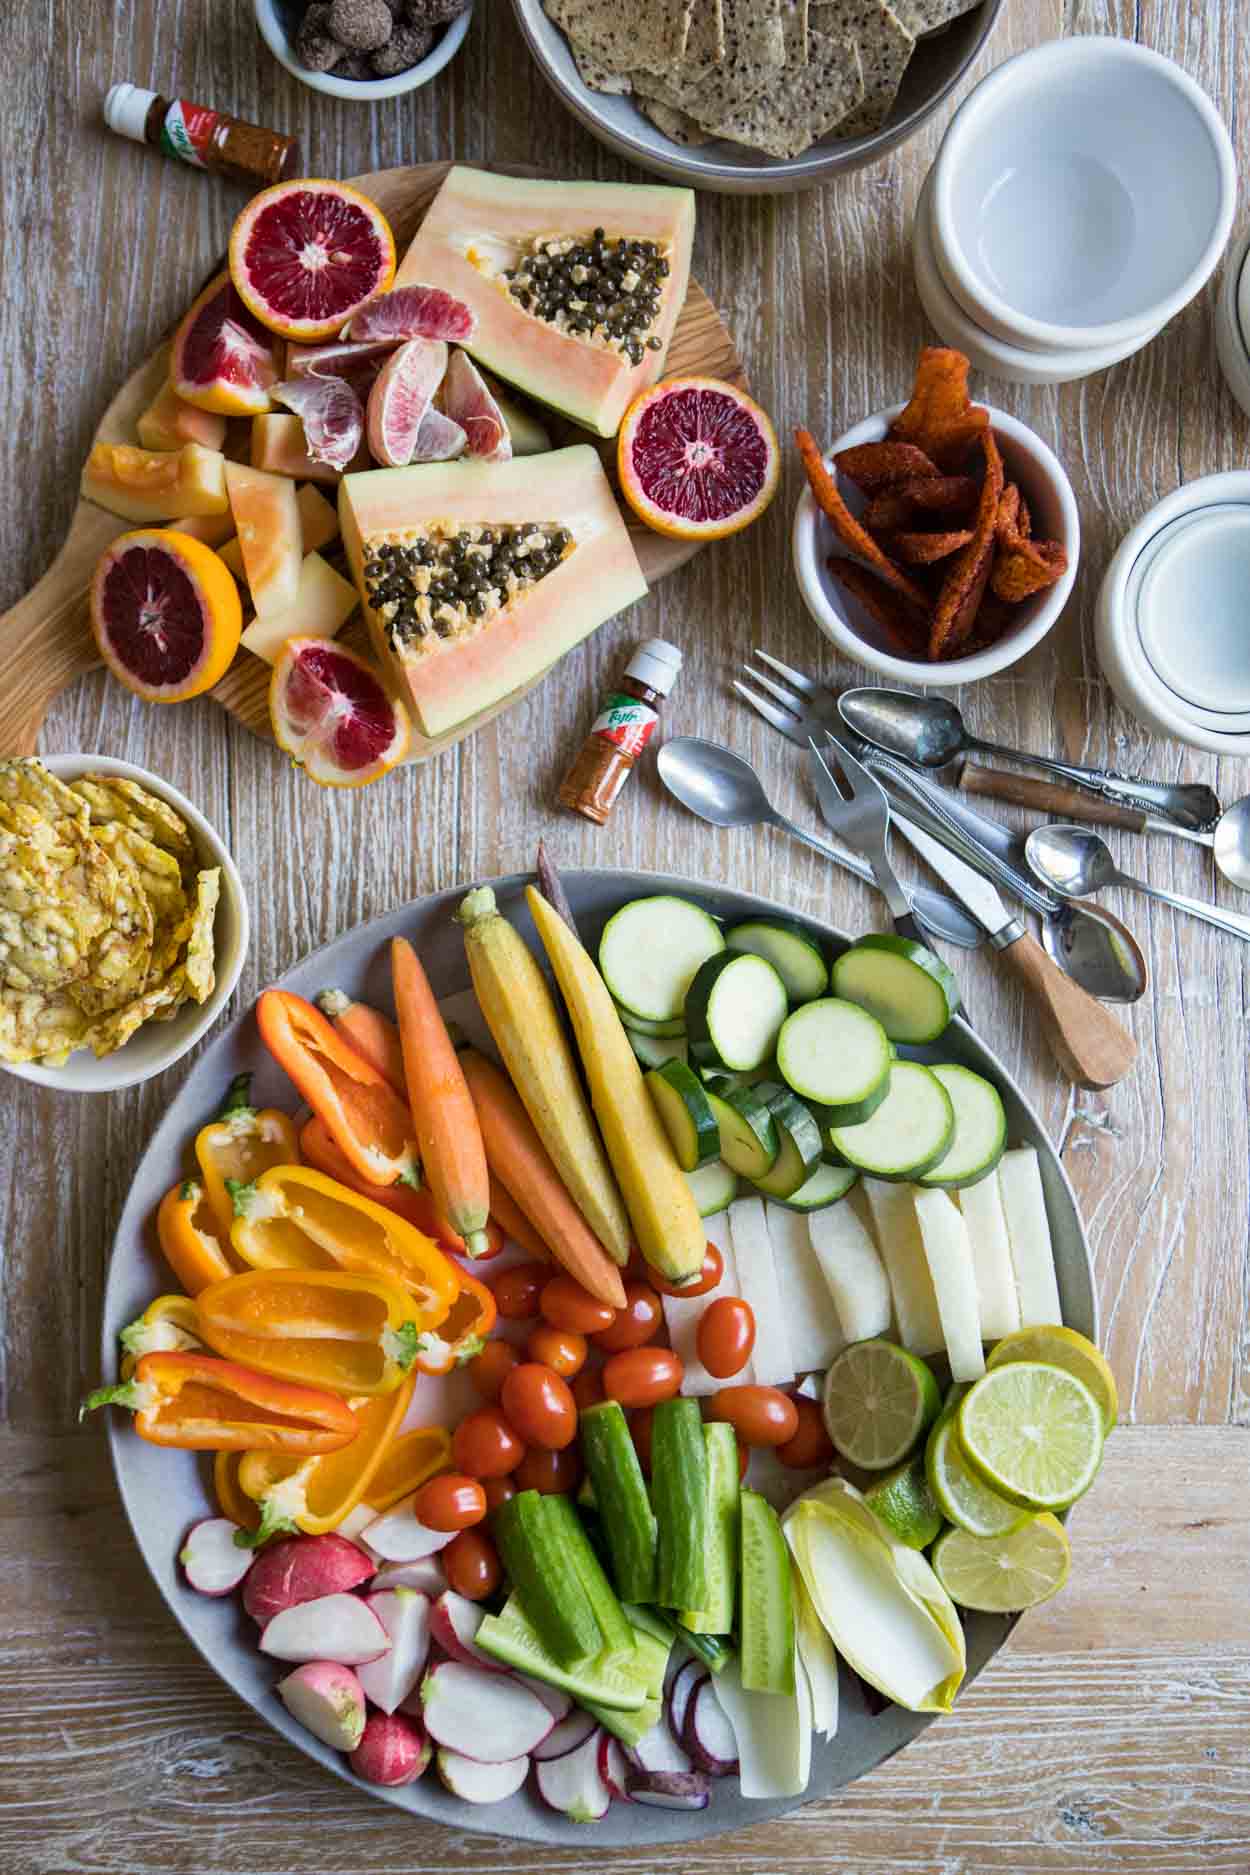 A mix of fruits and veggies on a round platter along with some other utensils and snacks to make a crudite